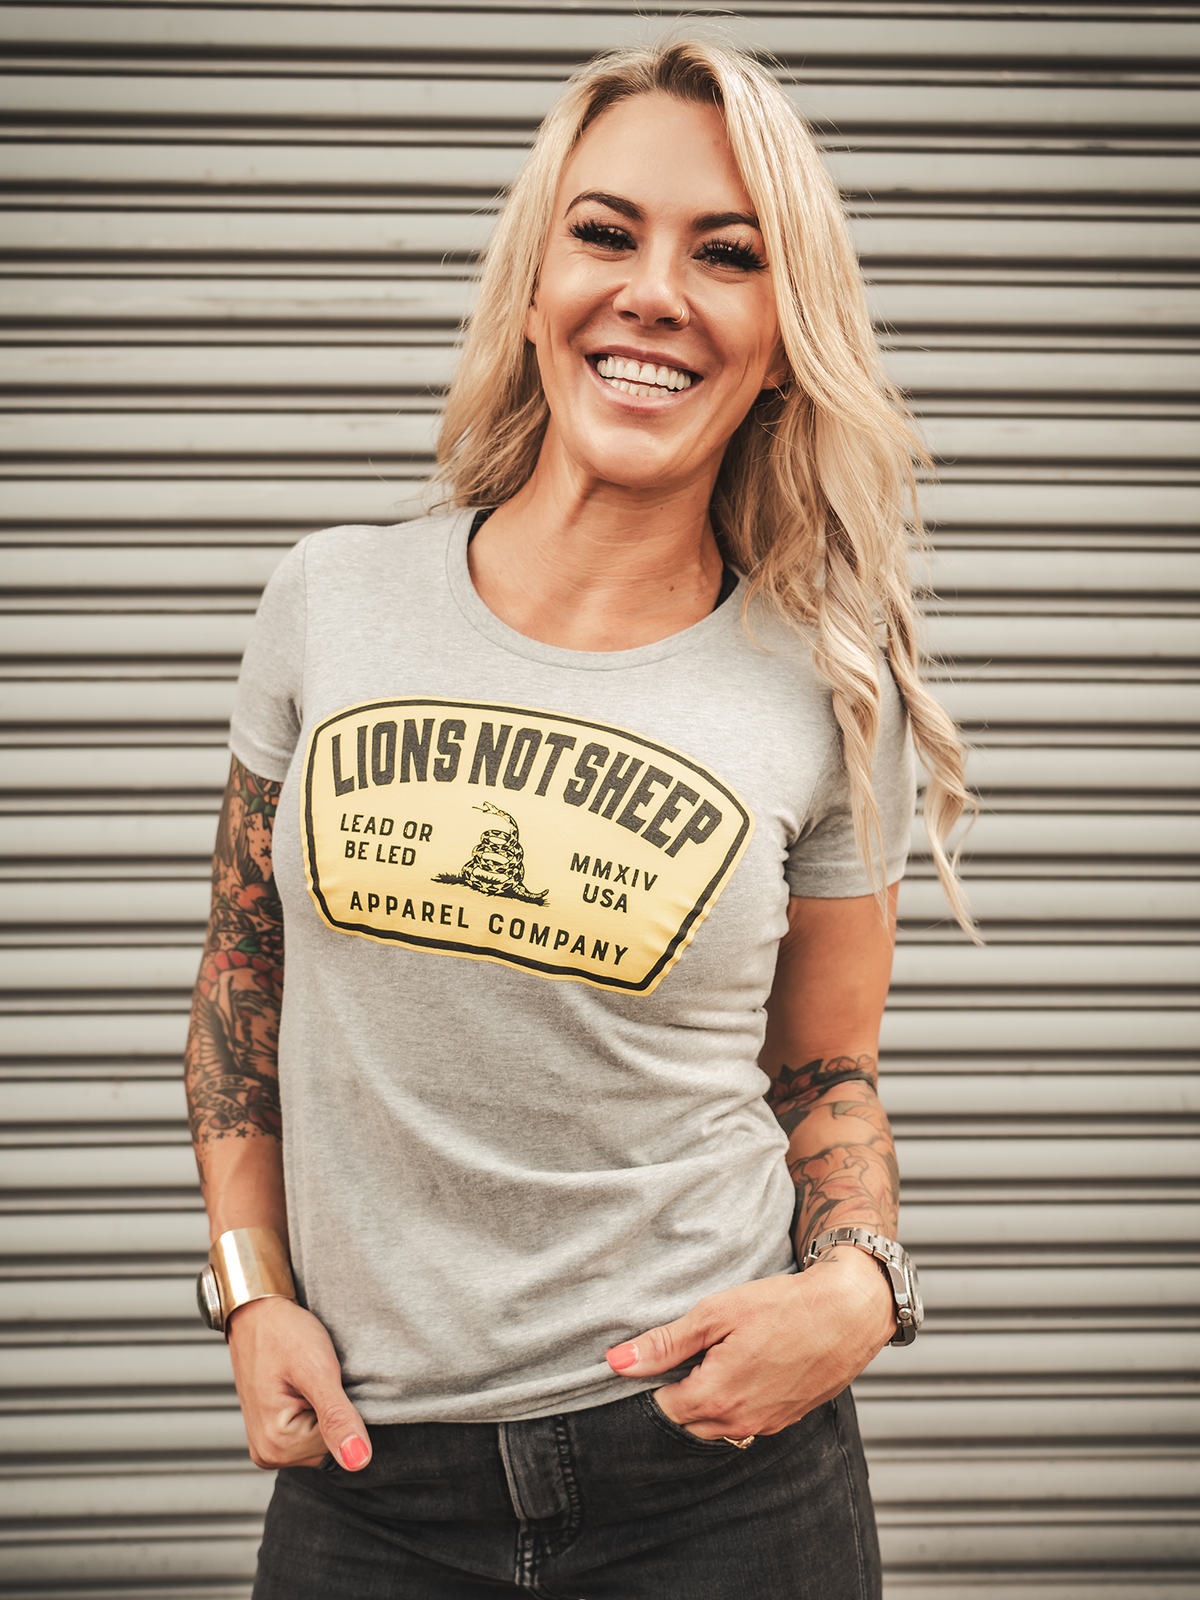 LEAD FROM THE FRONT Womens Tee - Lions Not Sheep ®